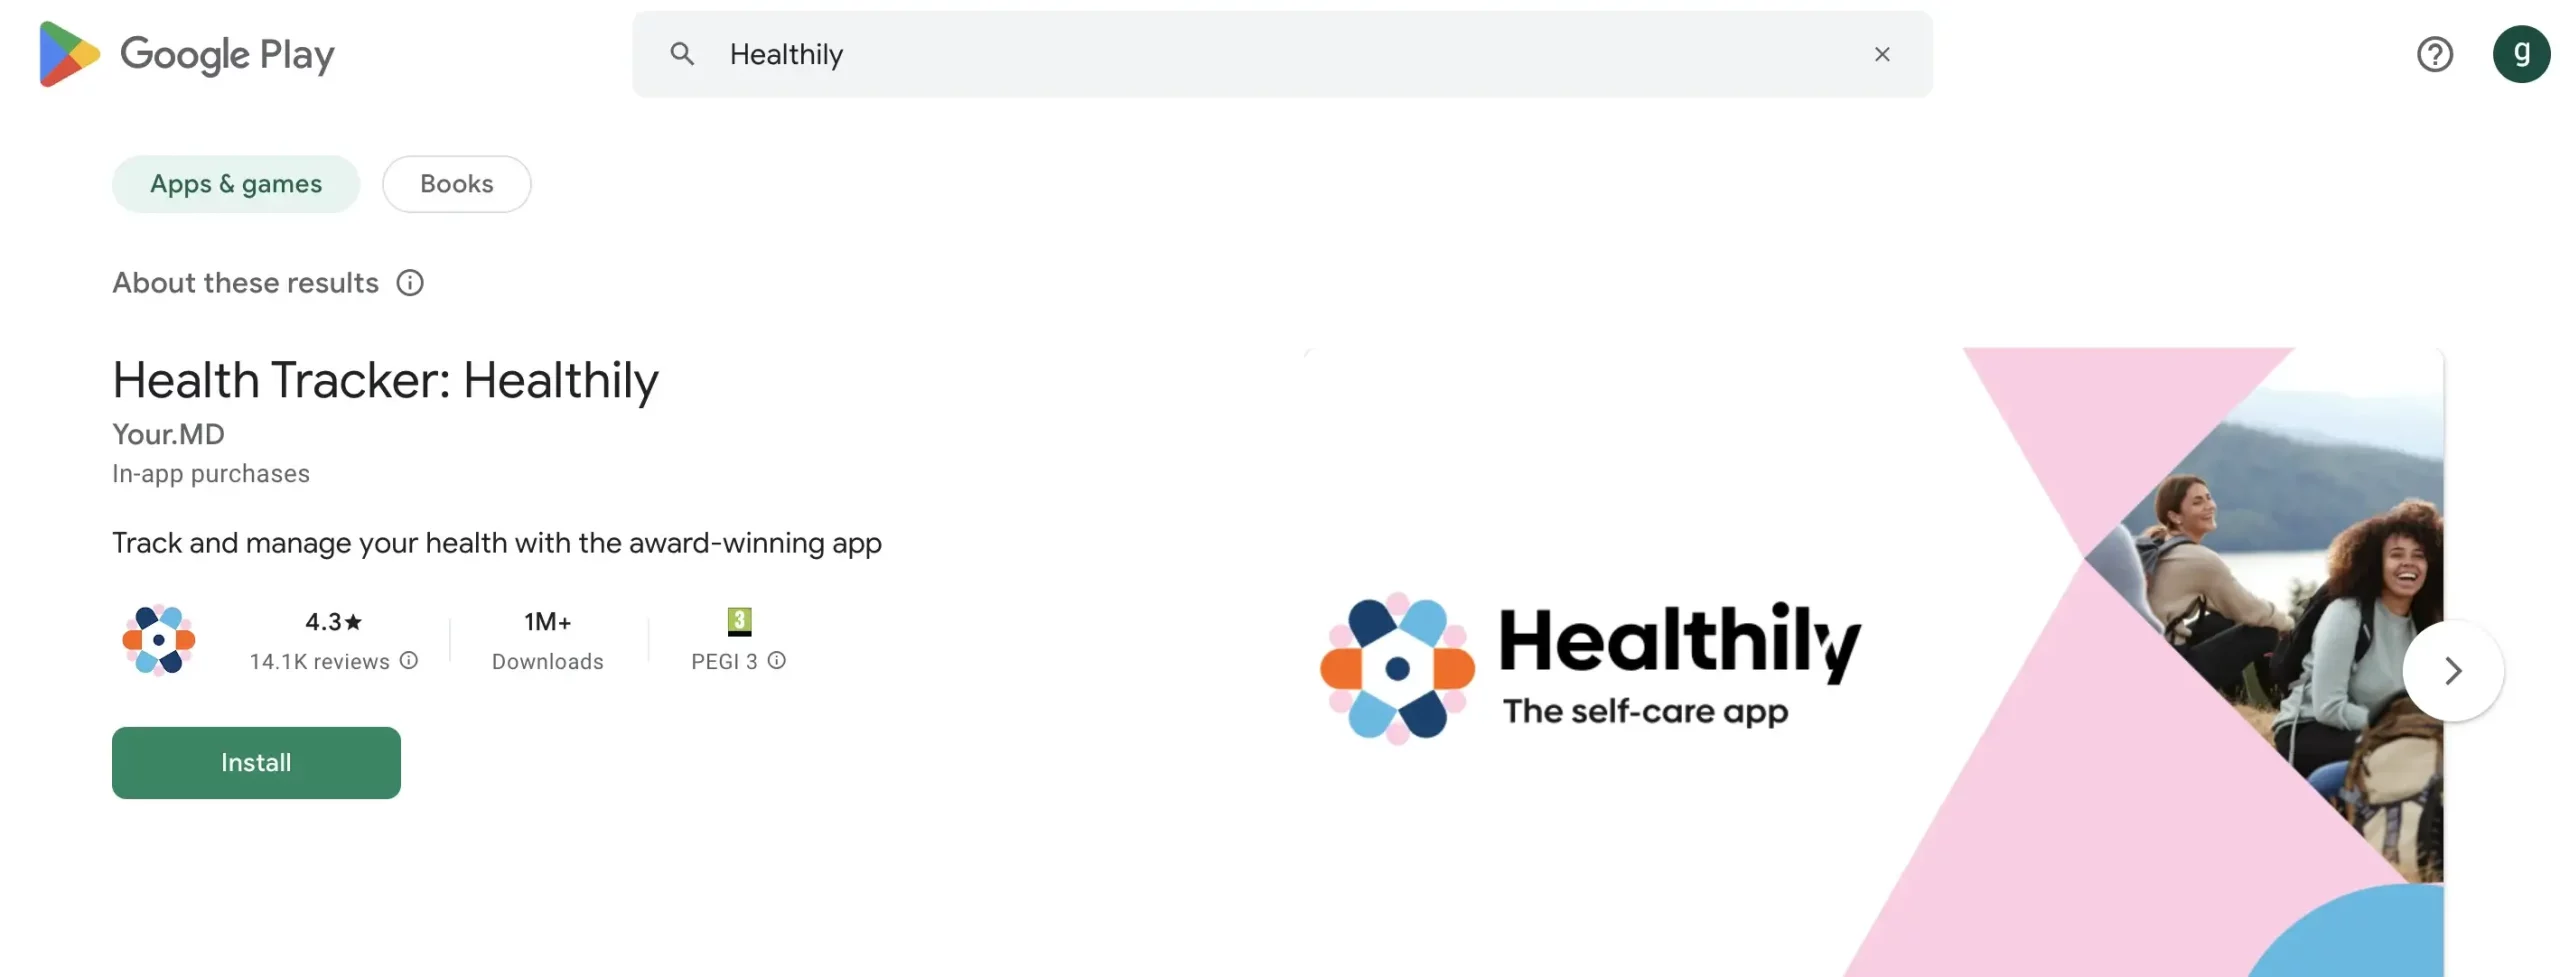 1. Healthily - The Self-Care App